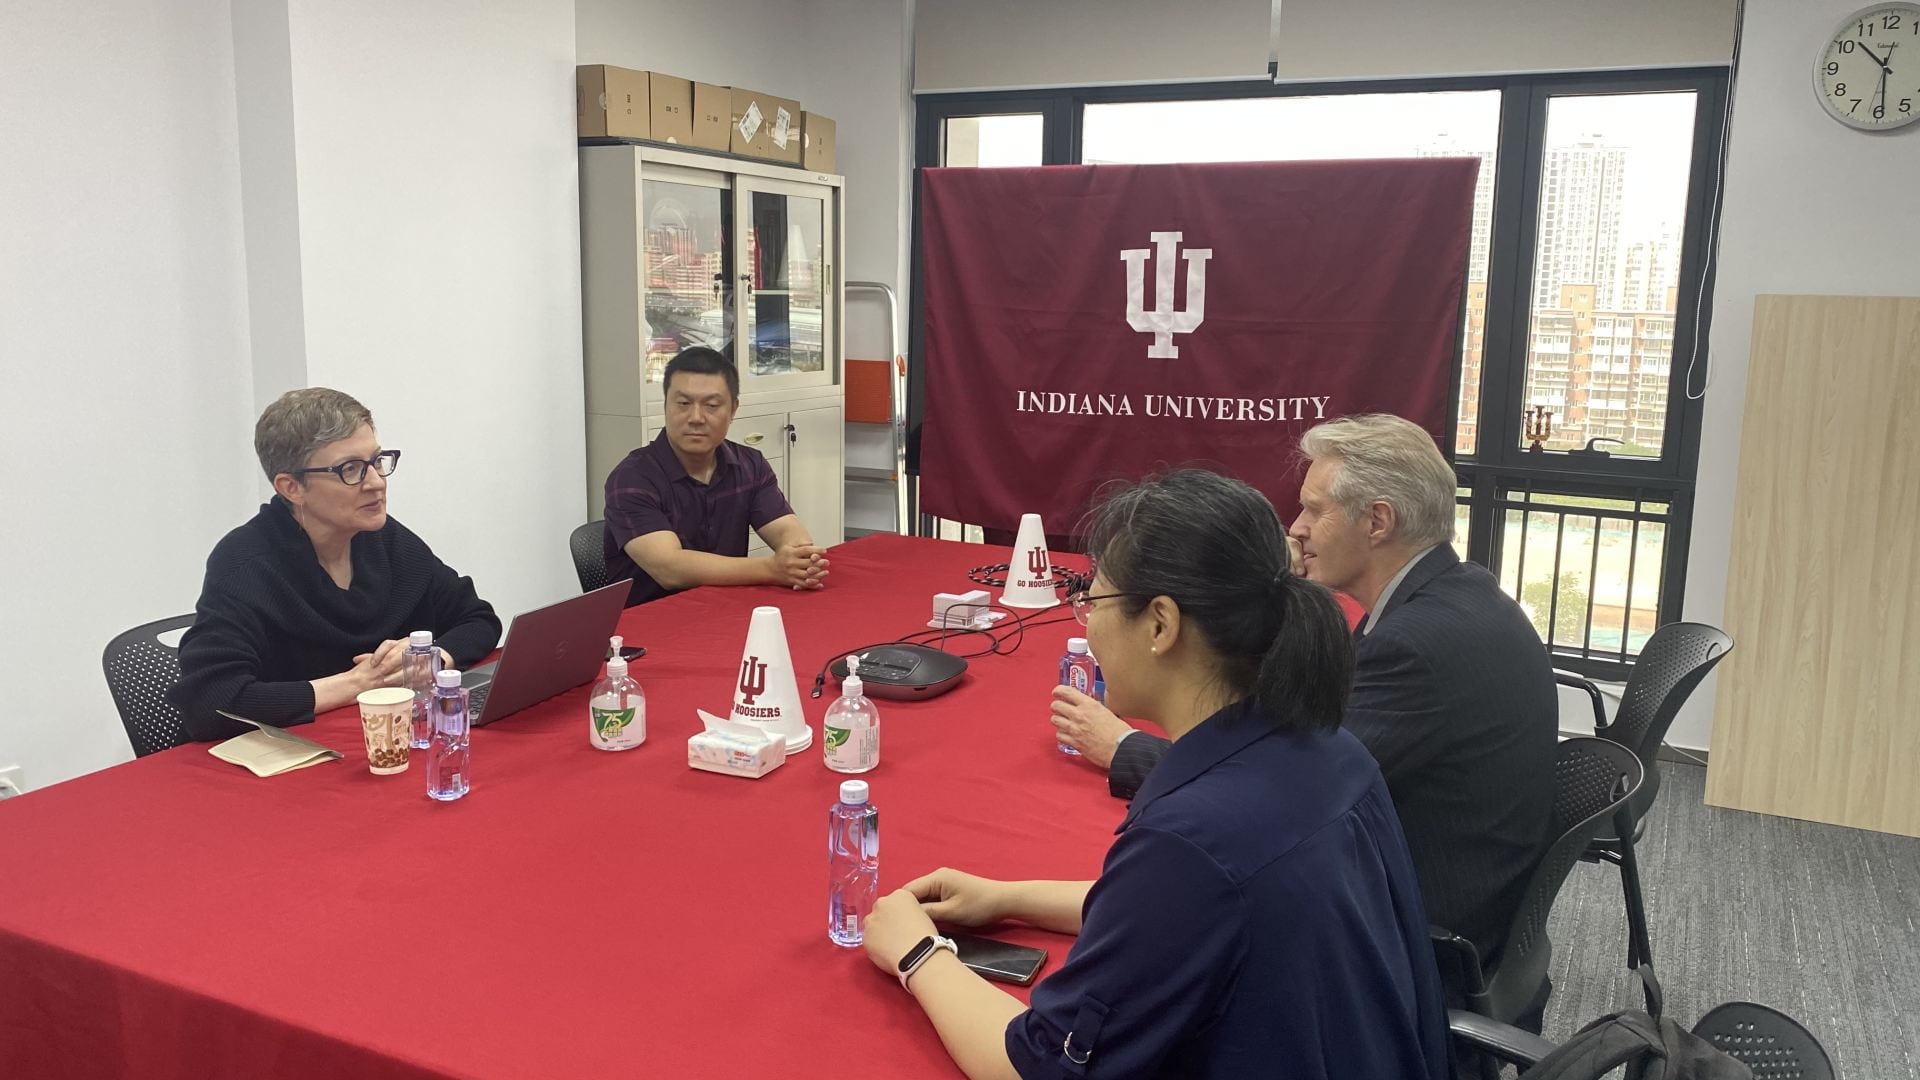 four people sit around a red table. A screen shows the Indiana University trident in the background.